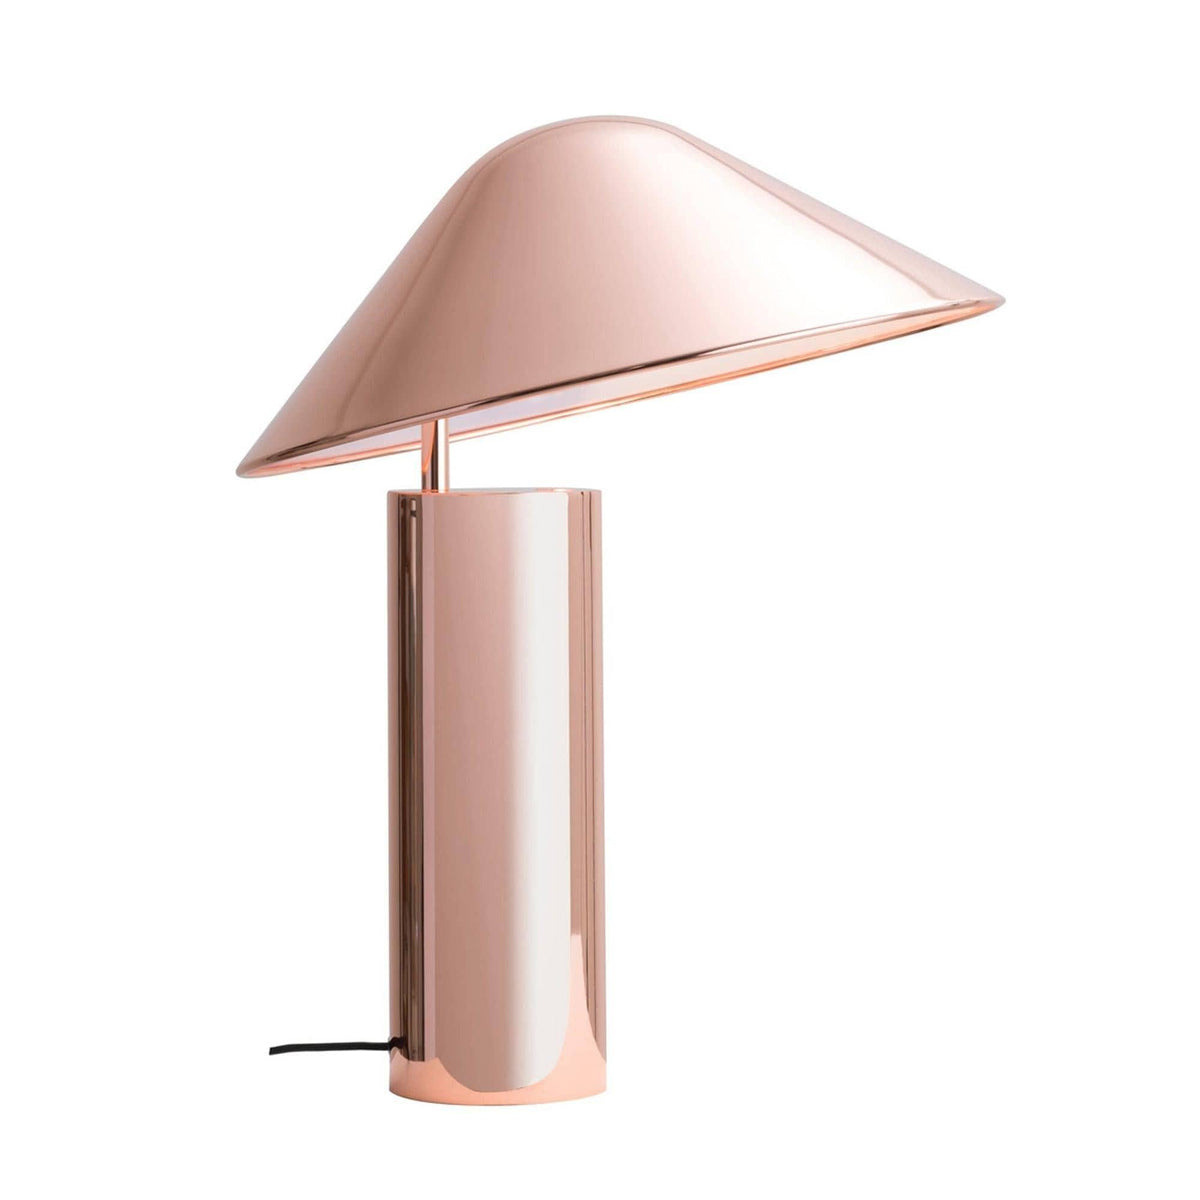 Seed Design - Damo Table Simple Lamp - SQ-339MDRS-CPR | Montreal Lighting & Hardware